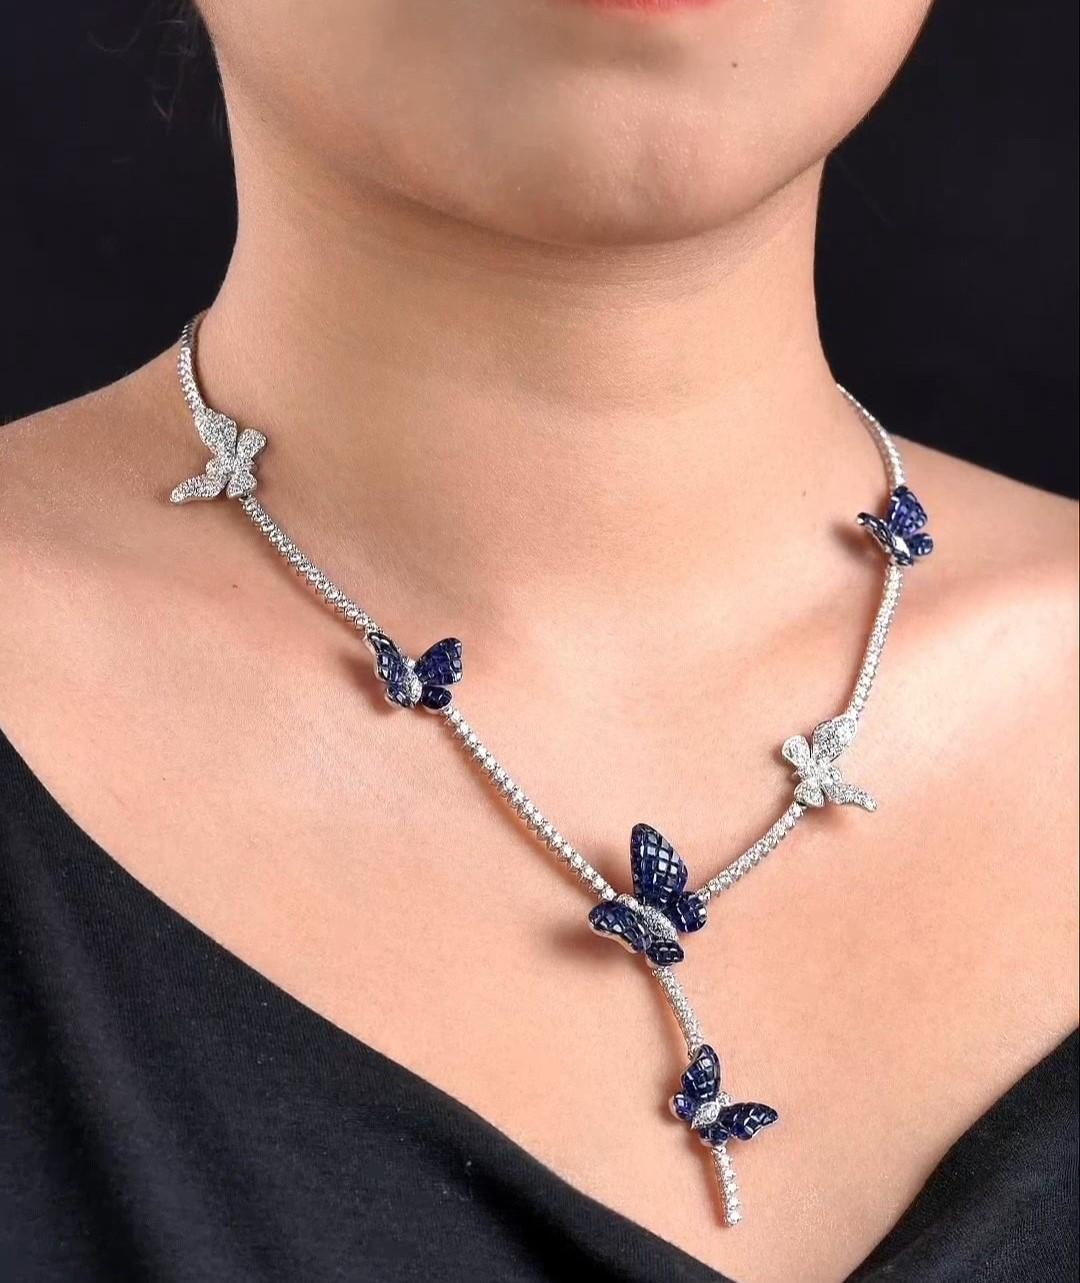 
The Following Item we are offering is a Rare Important Radiant 18KT Gold Gorgeous Glittering Butterfly Blue Sapphire and Diamond Necklace. Necklace Feature Gorgeous Colorful Blue Sapphires adorned with Spectacular Glittering Round Diamonds all set